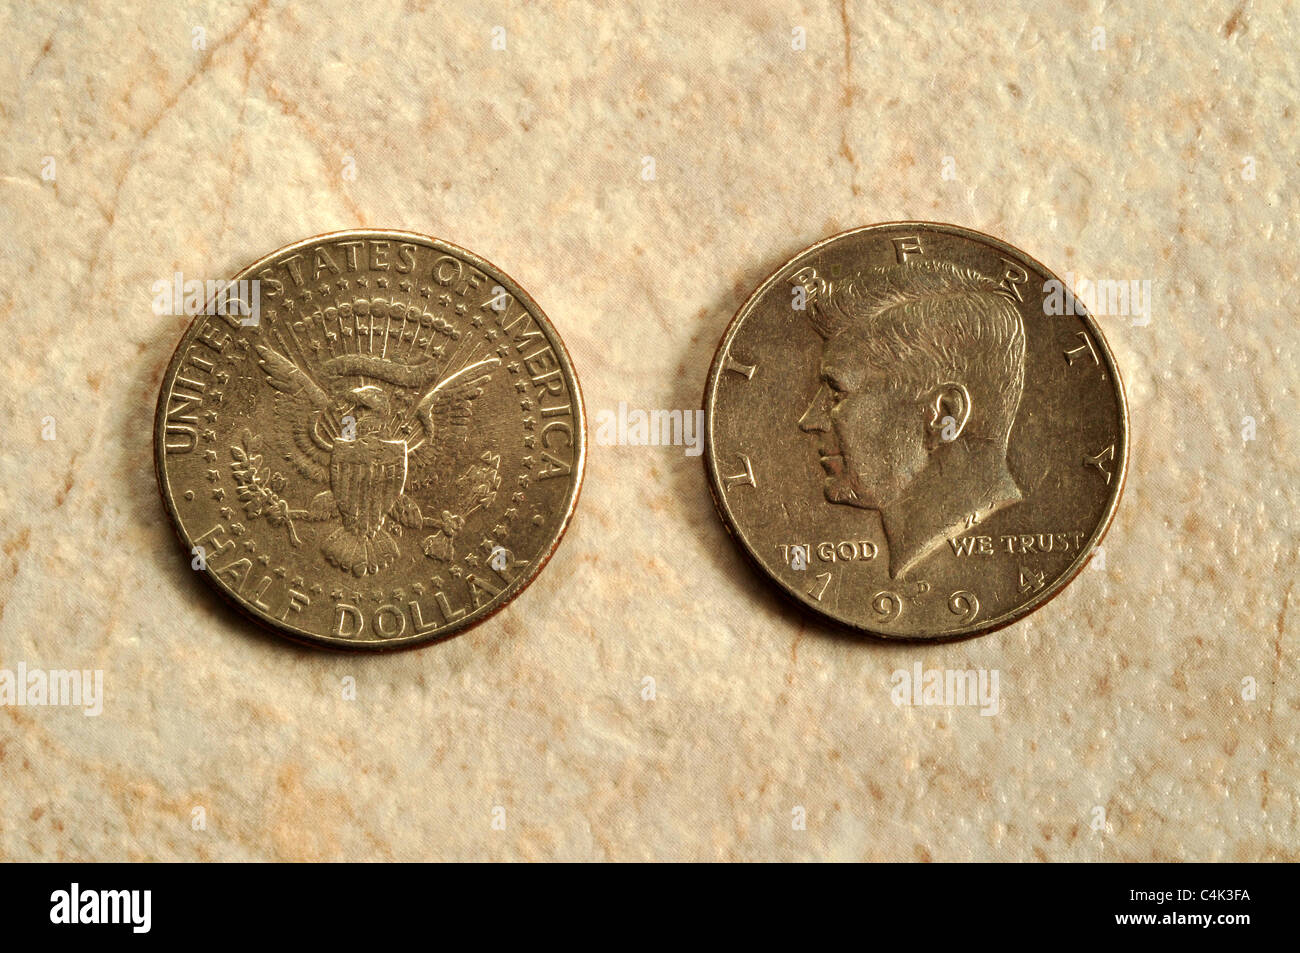 The front and back view of a US fifty cent piece. Stock Photo